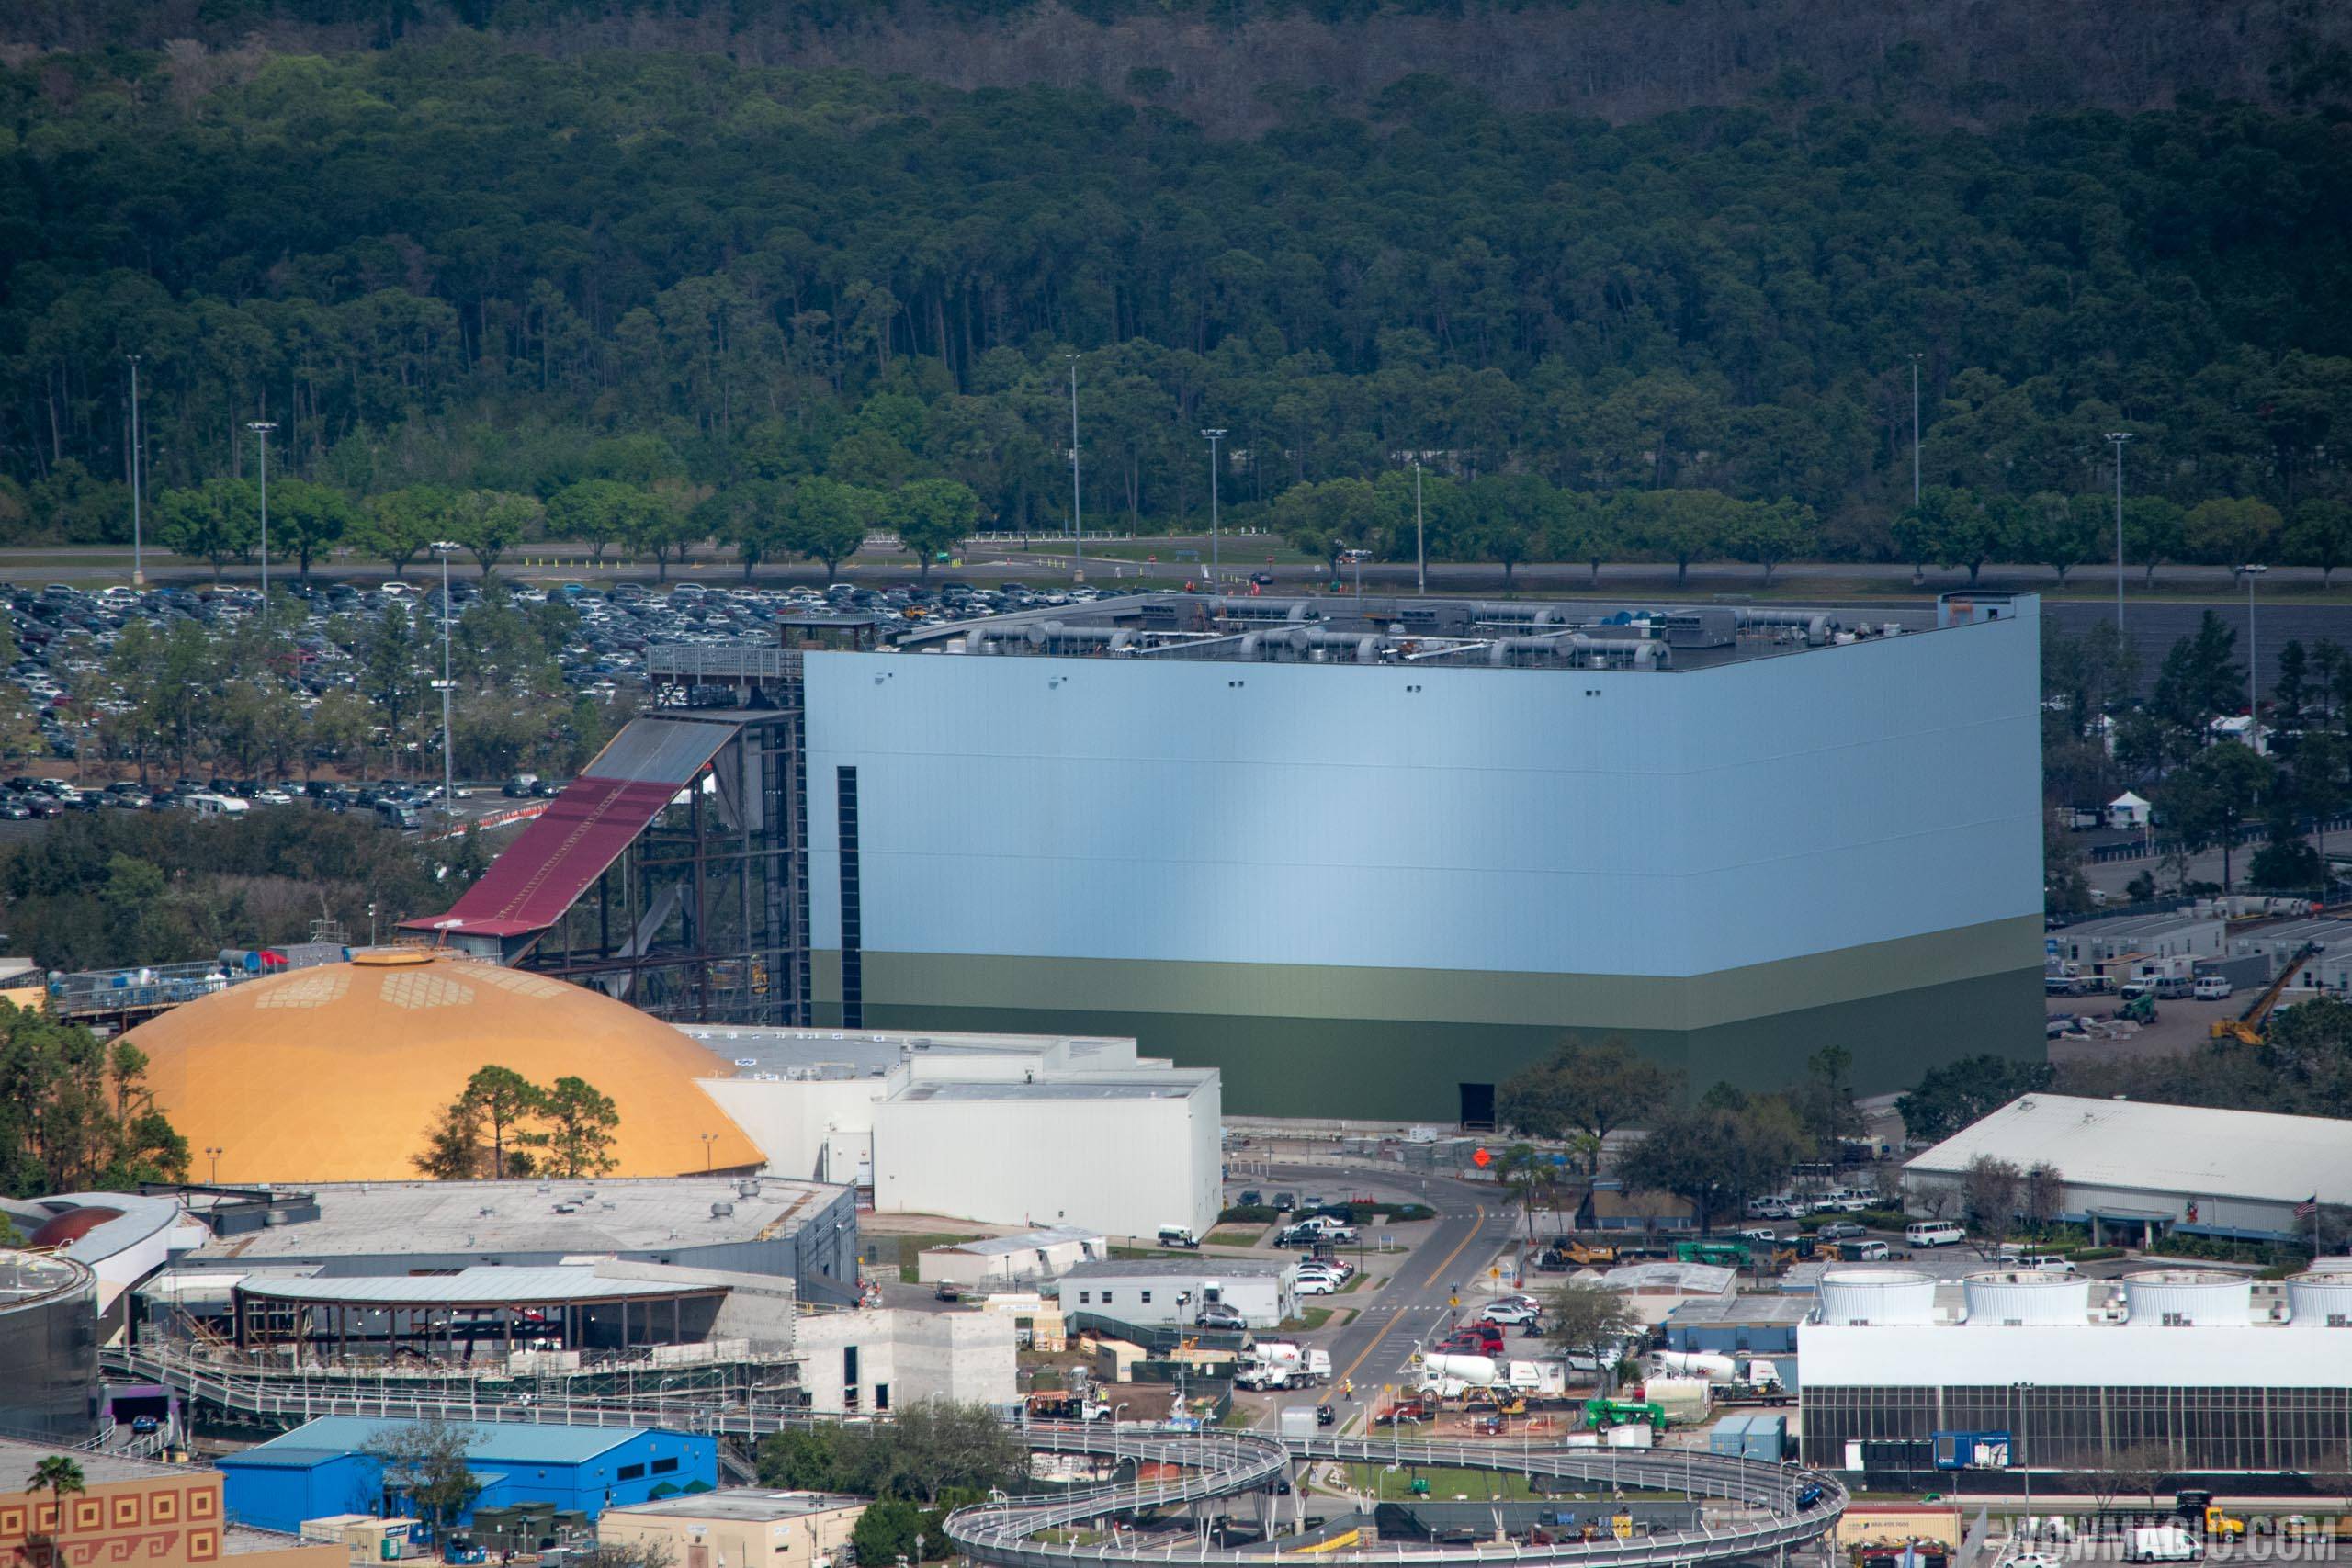 PHOTOS - Latest look at Epcot's Guardians of the Galaxy from the air